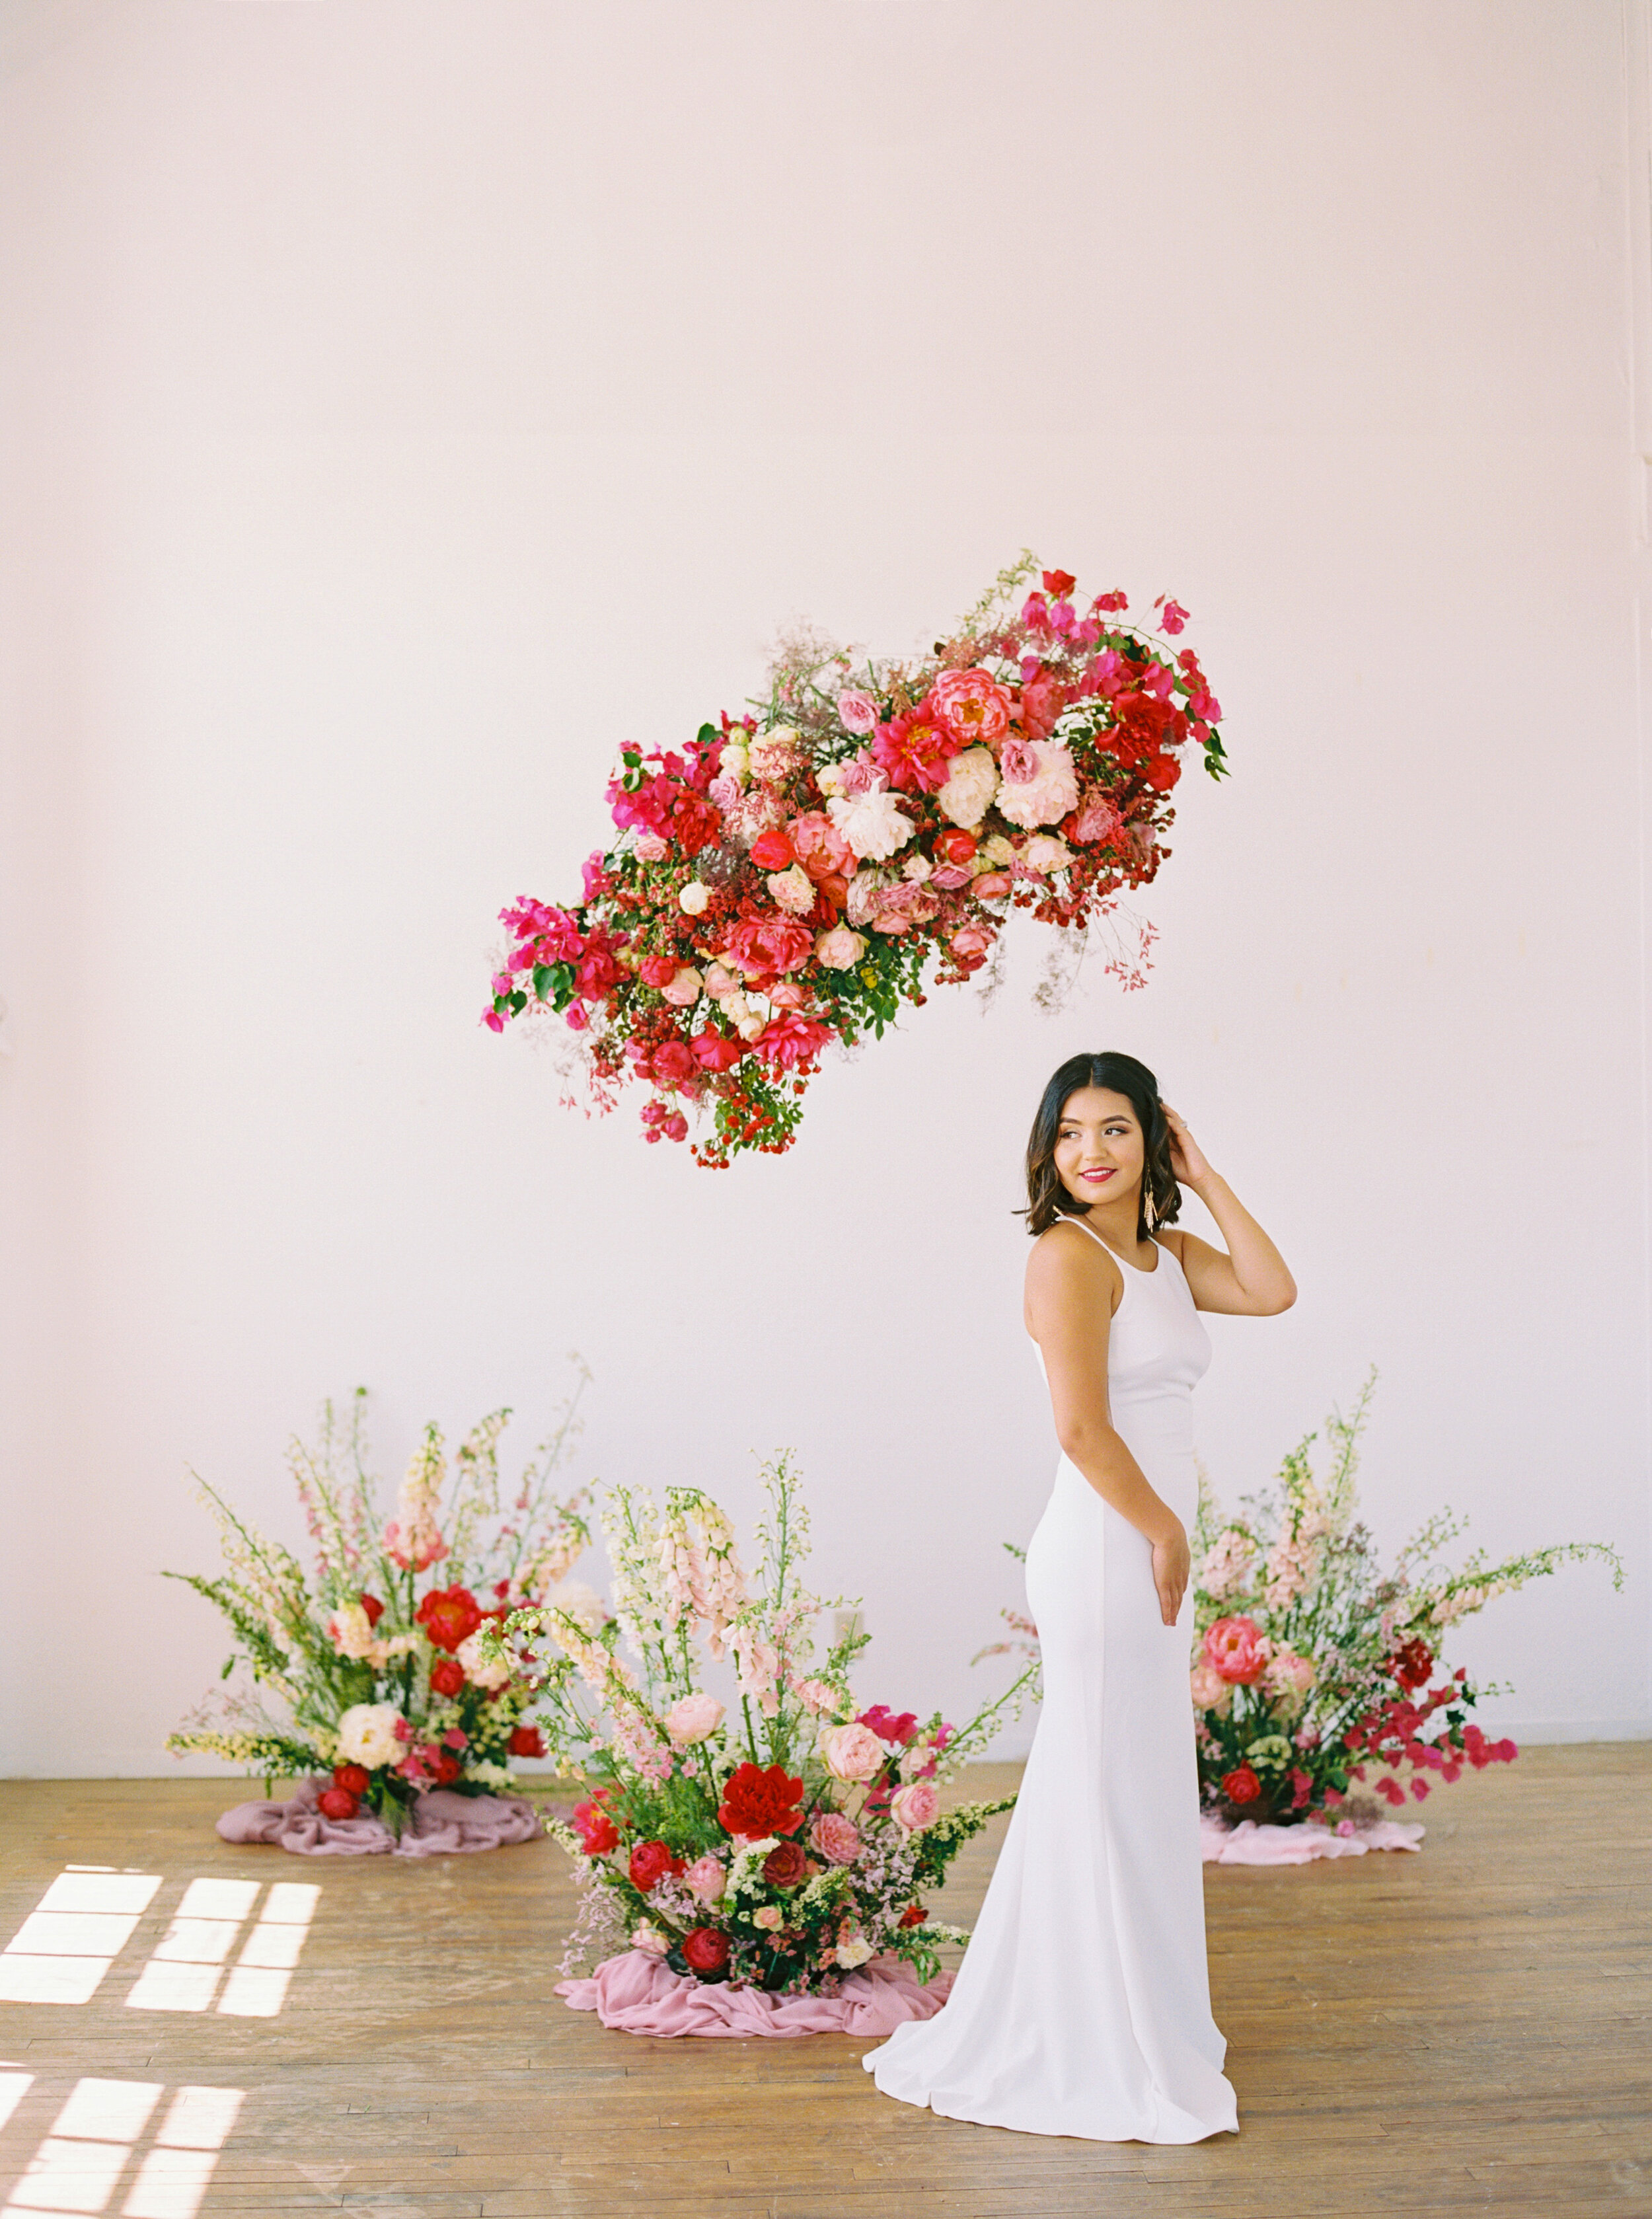 A Romantic Wedding Elopement Filled with Colorful Fuchsia - Sarahi Hadden Submission-47.jpg